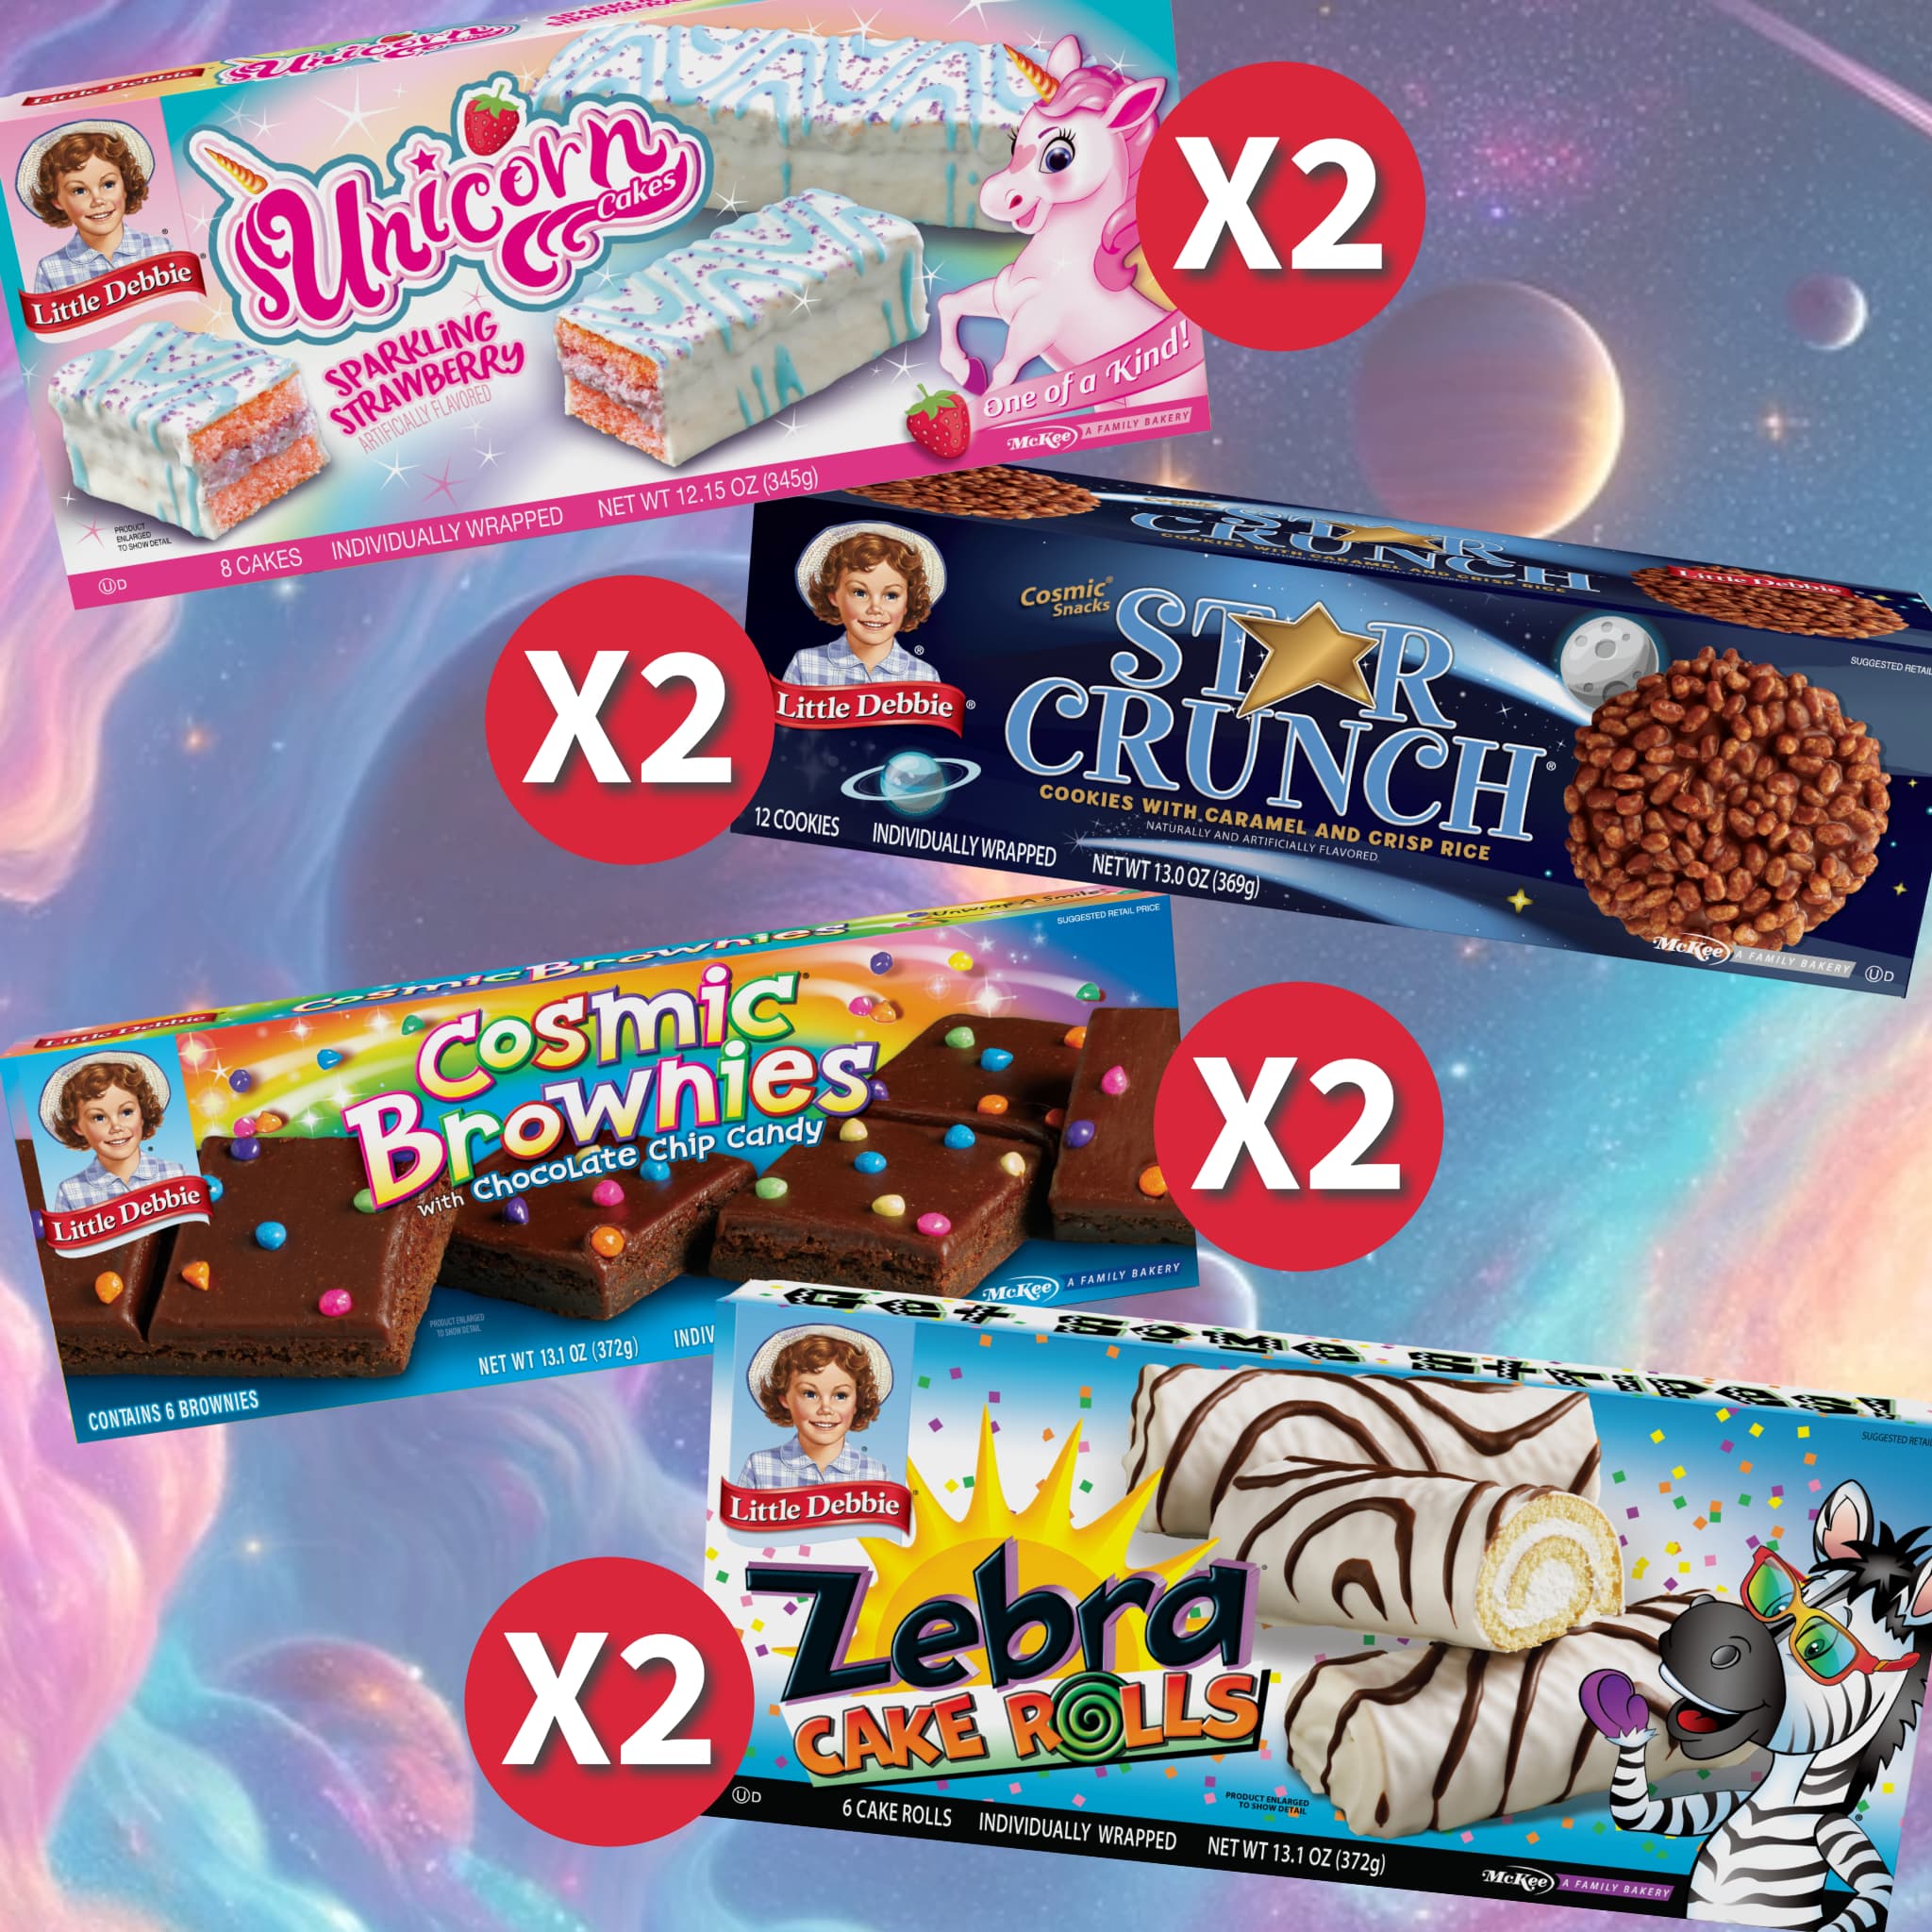 A collection of Little Debbie snacks displayed against a cosmic background, featuring two cartons each of Unicorn Cakes, Star Crunch, Cosmic Brownies, and Zebra Cake Rolls. Each carton is accompanied by a red circle with "X2" indicating the quantity. 